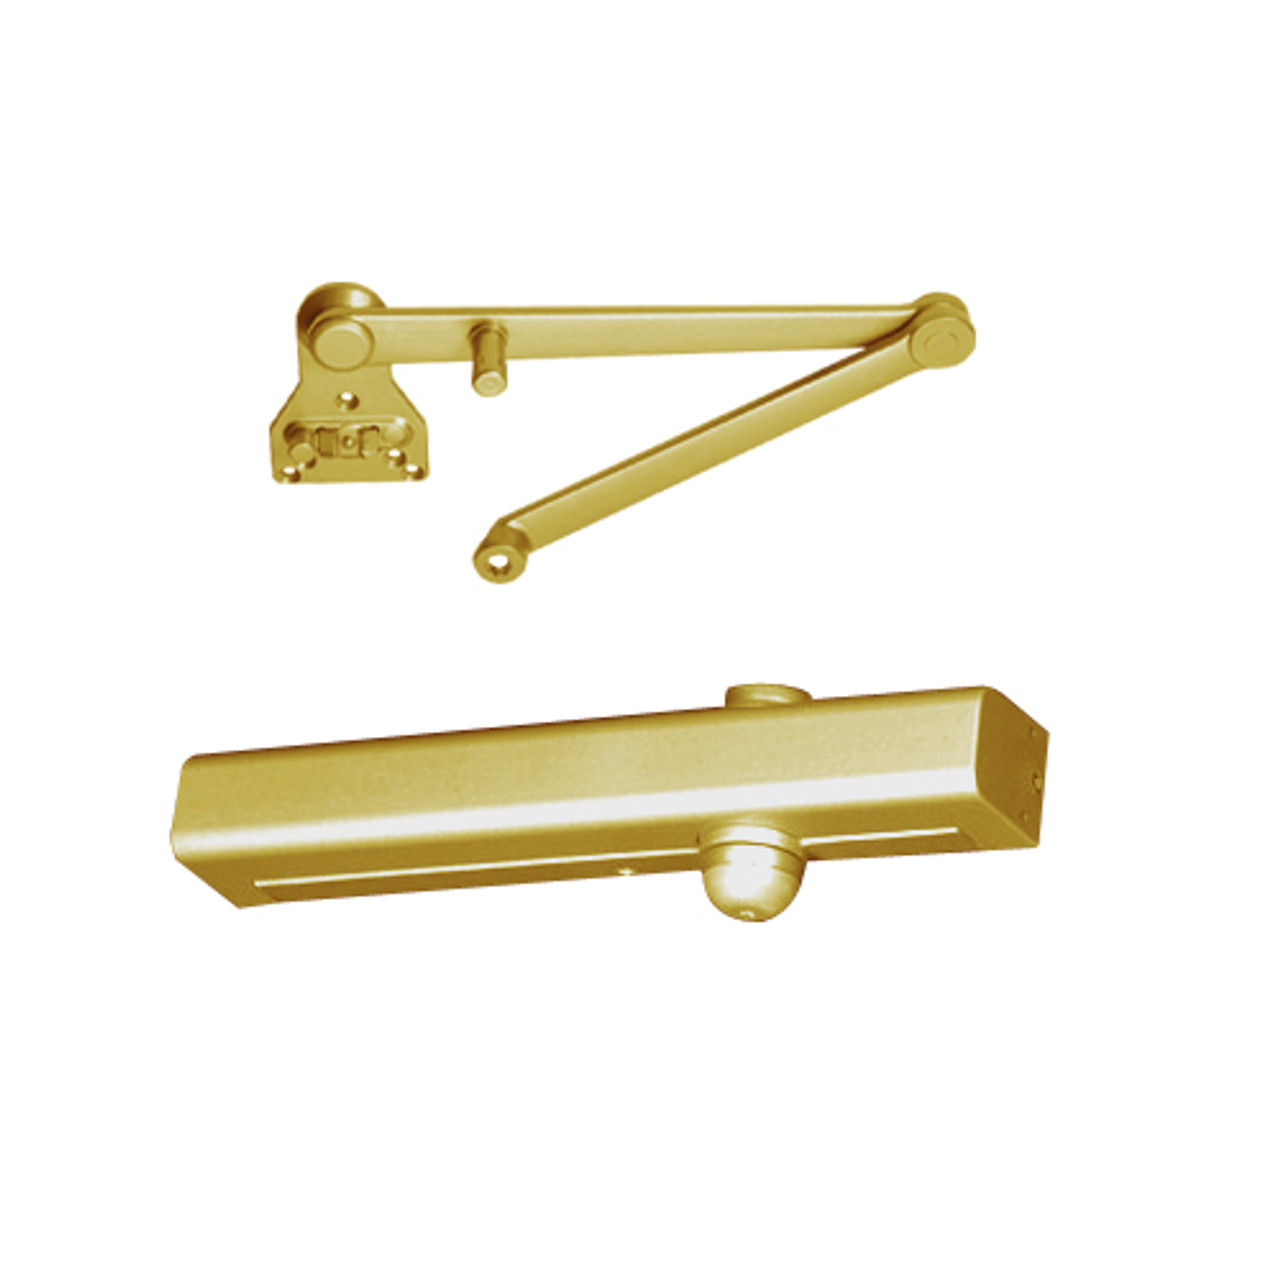 CLP8301R-696 Norton 8000 Series Hold Open Door Closers with CloserPlus Ramp Arm in Gold Finish